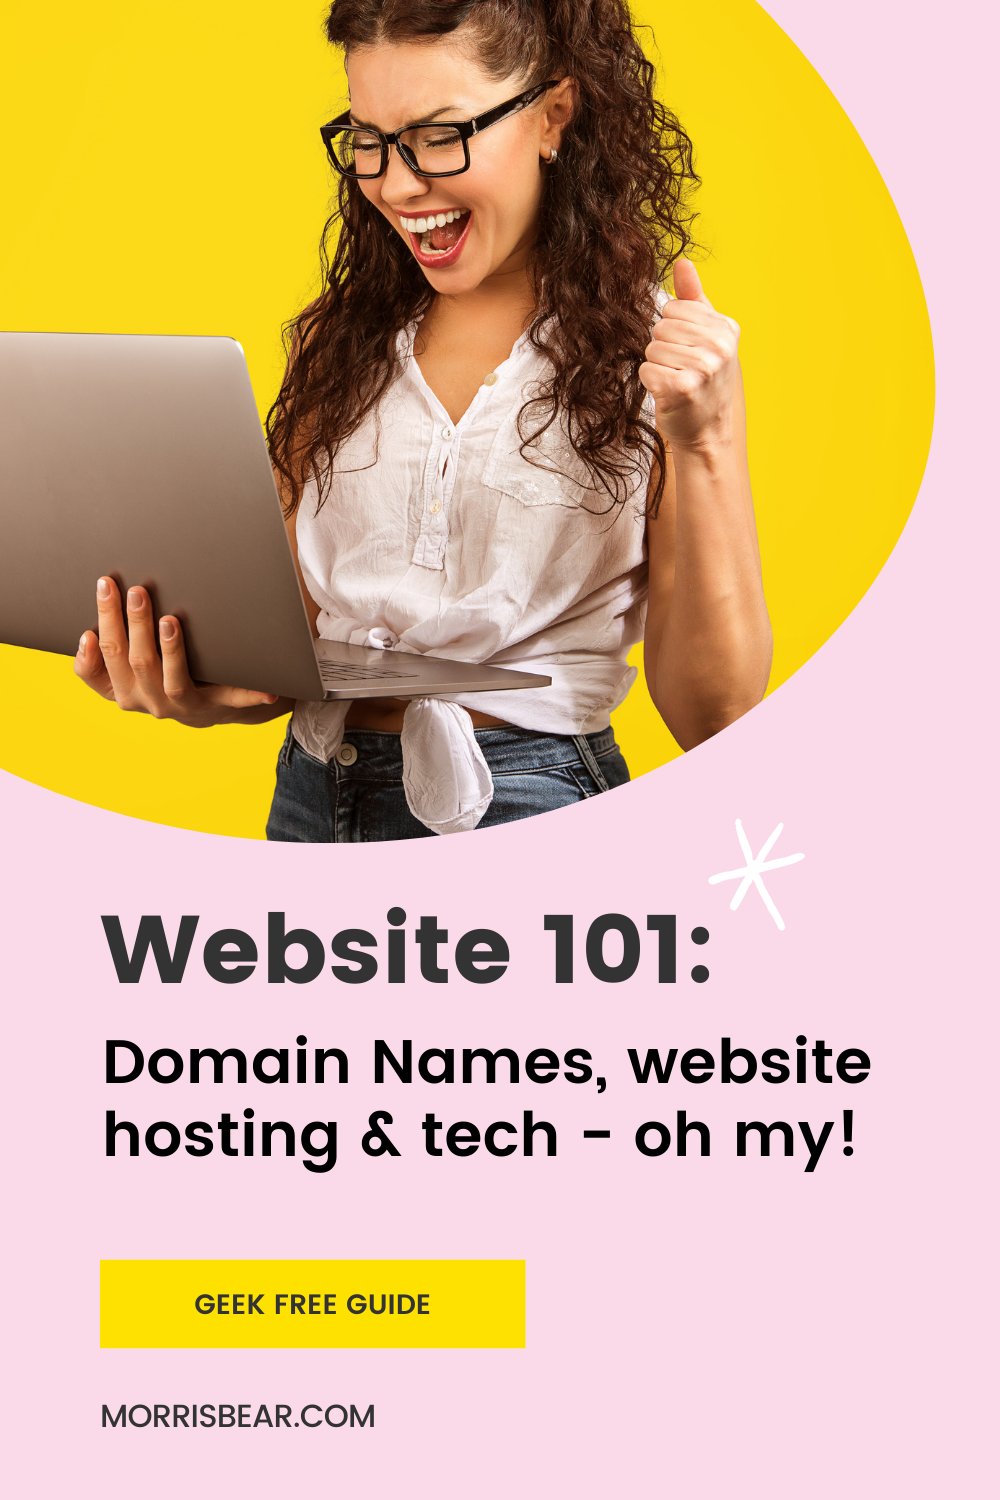 When you're starting to build a website, the never-ending to-do list can be completely overwhelming. Don't fear in today's episode I'm breaking down exactly what you need to launch your website quickly and easily.